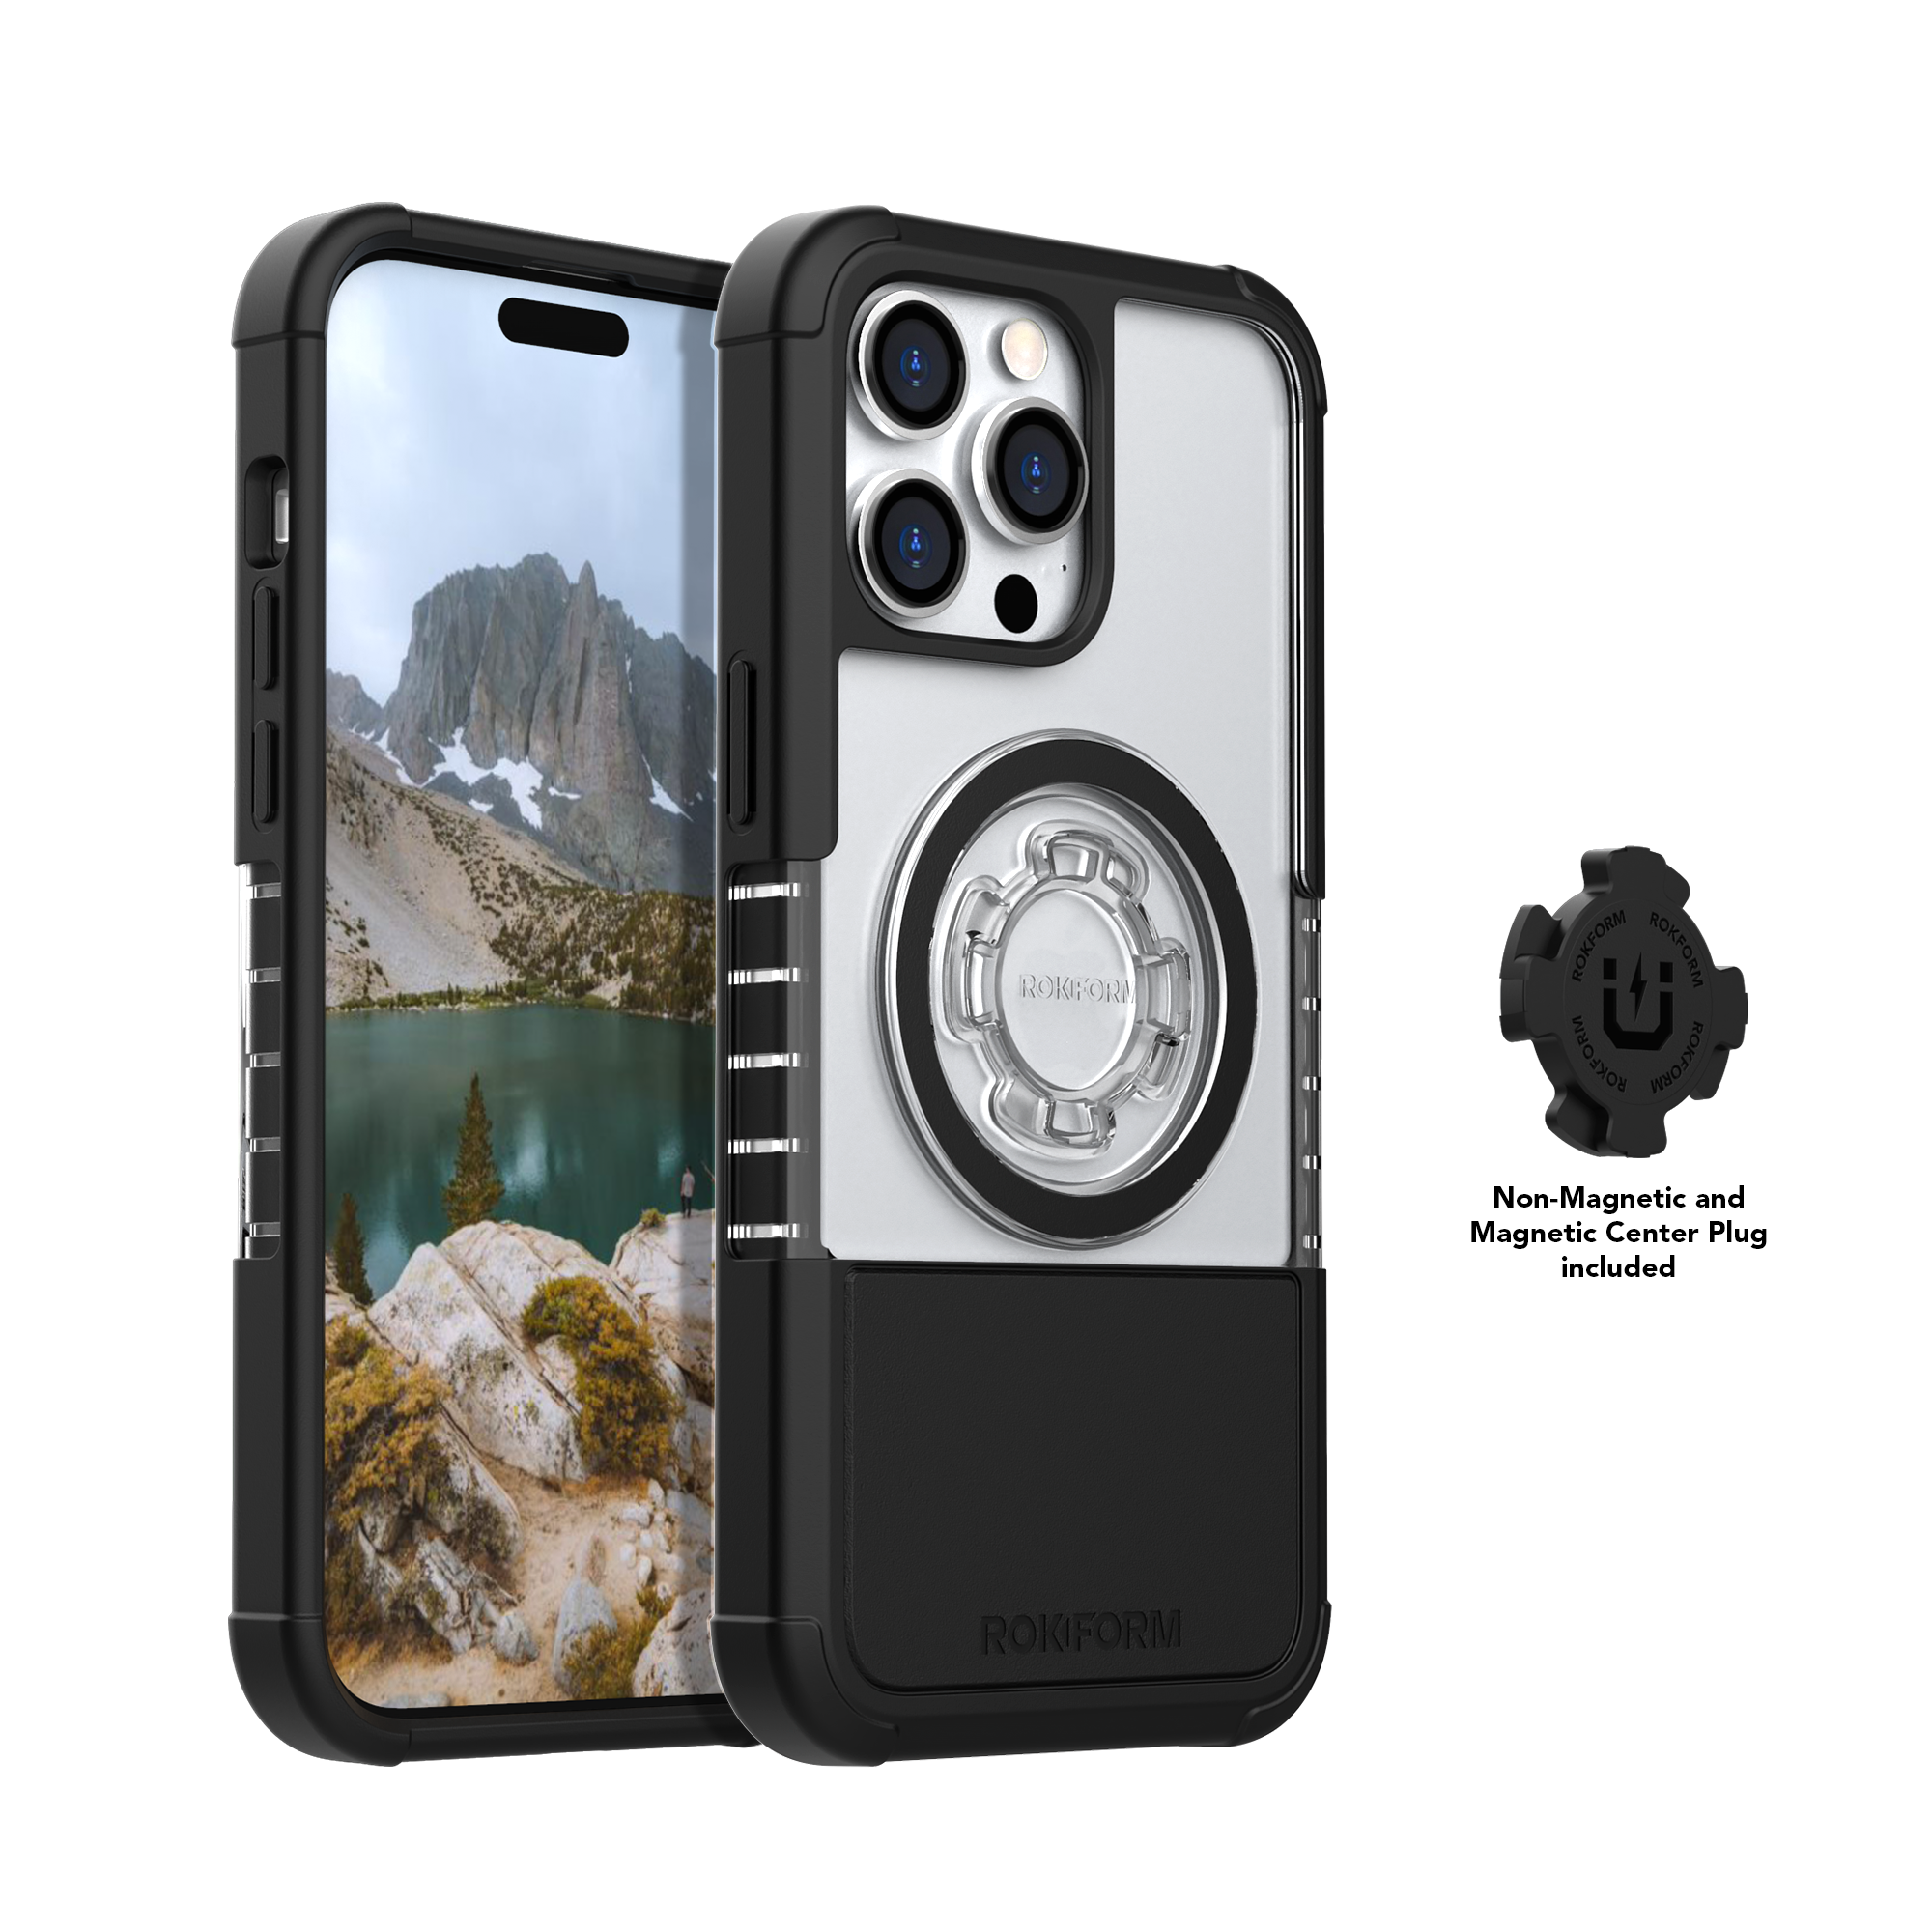 Insten Square Case For Iphone 12 Pro Max 6.7, Soft Tpu Protective